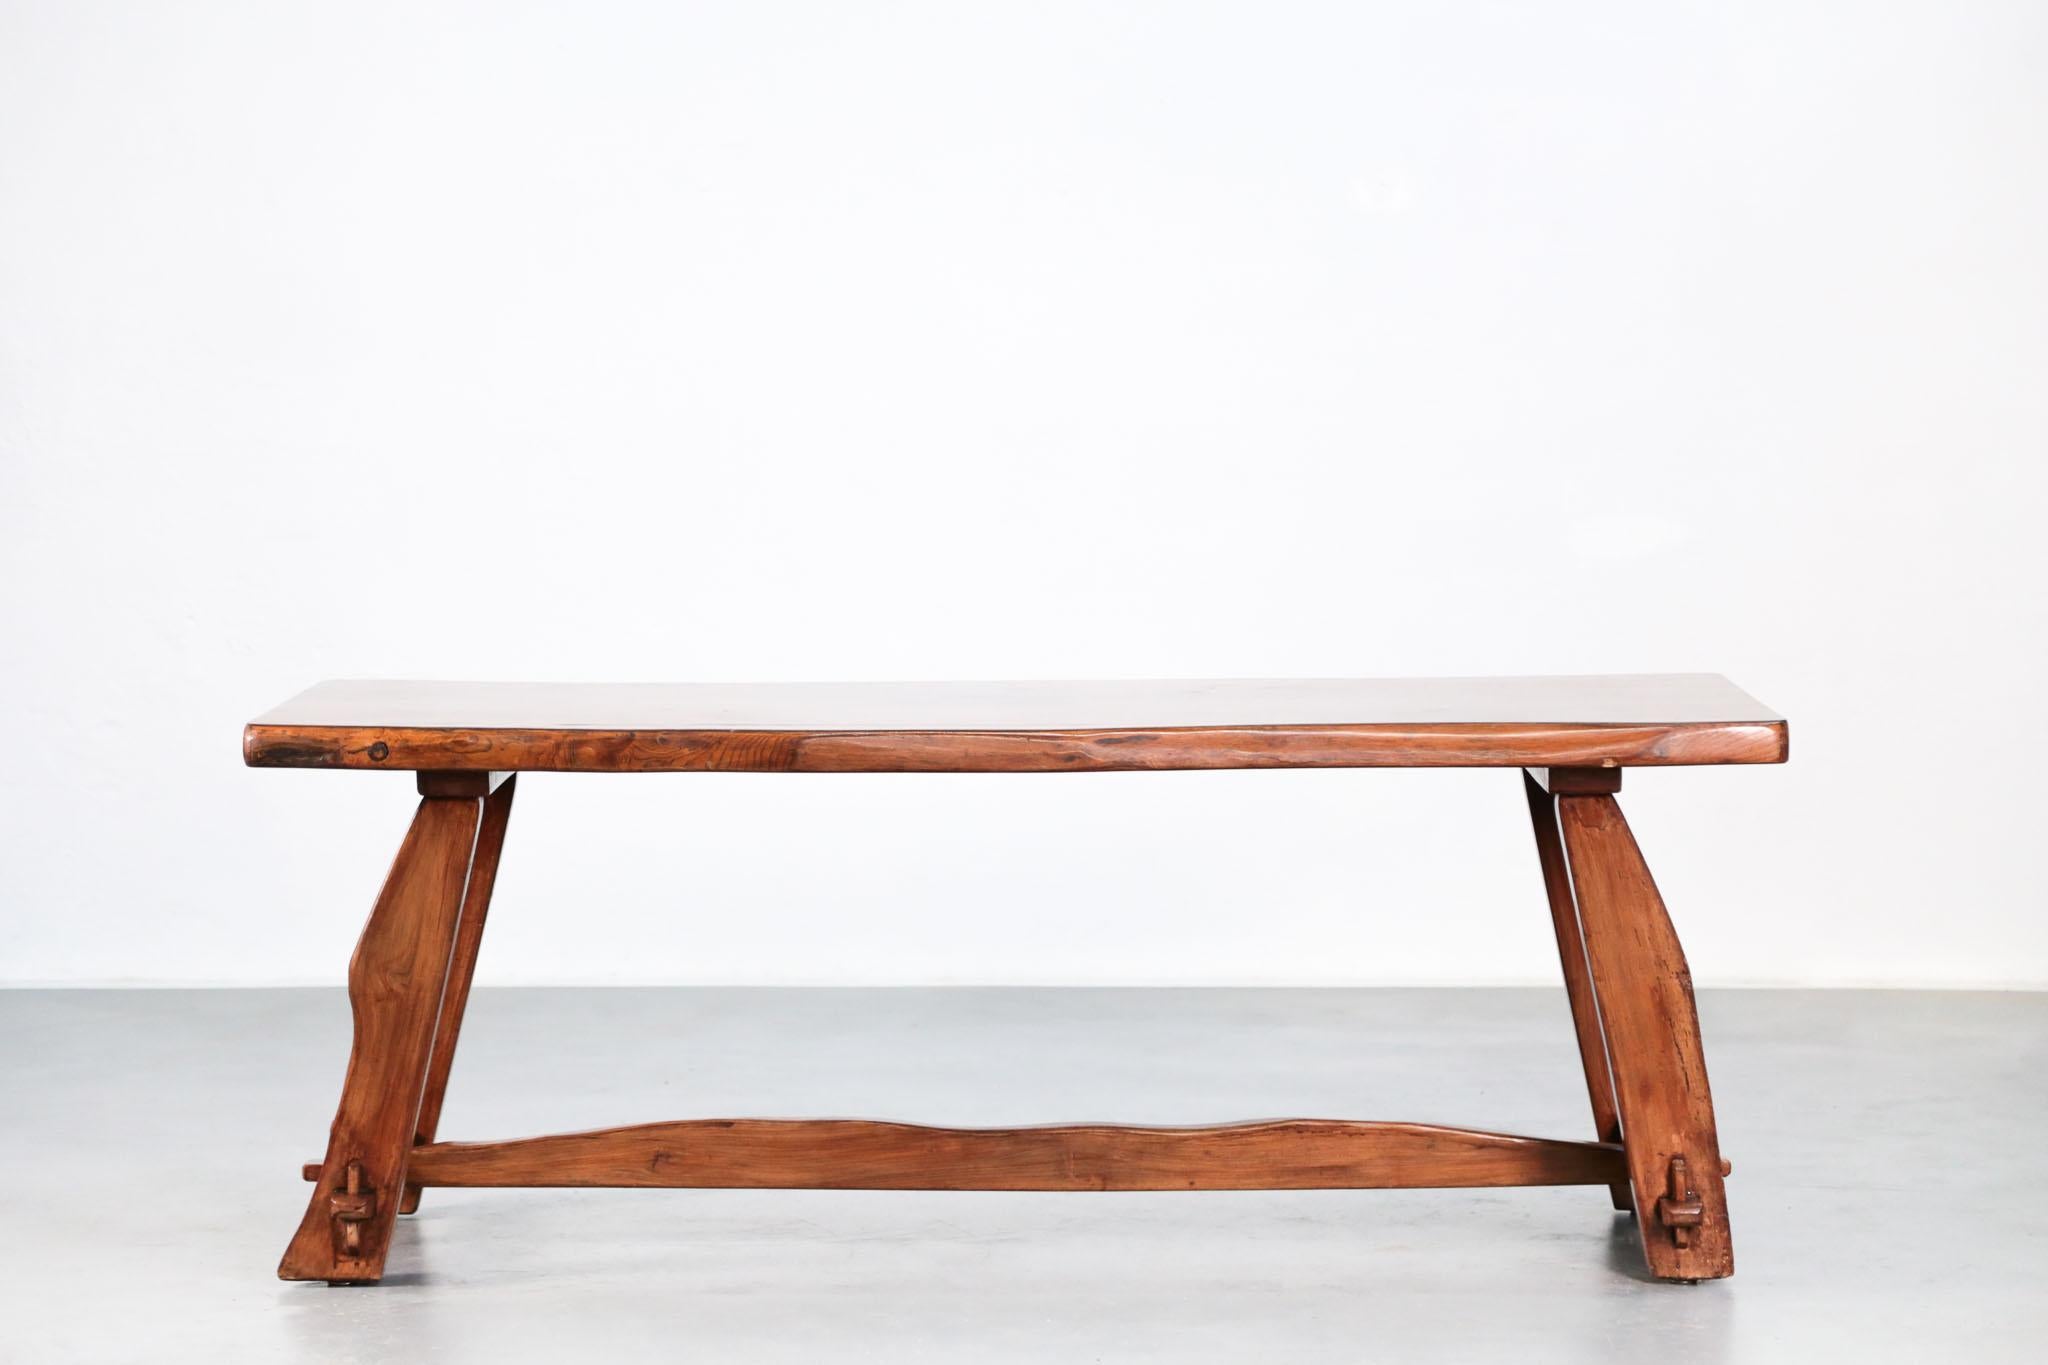 Elm Olavi Hanninen Dining Room Set, Table and Benches